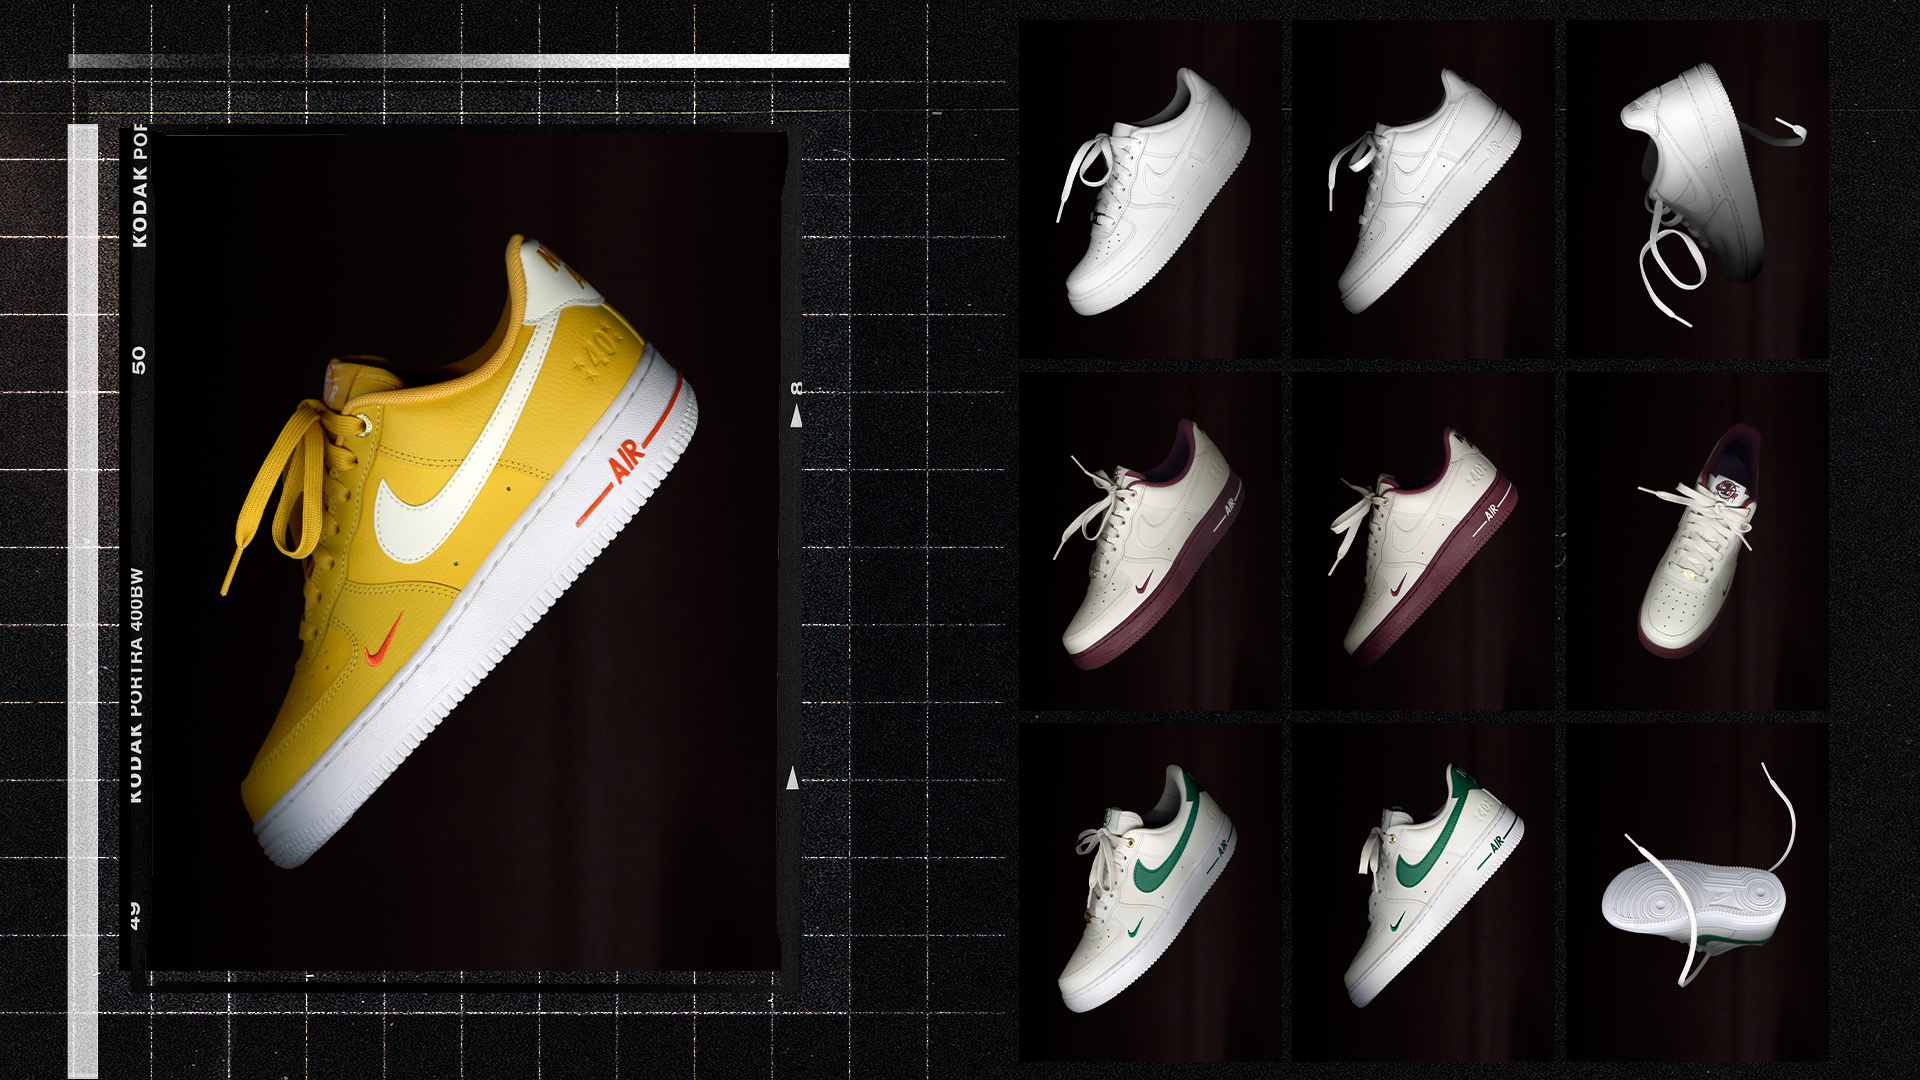 Nike Air Force 1 40th Anniversary Join Forces Pack Sneaker Releases Storm DeBarge Lil KeKe